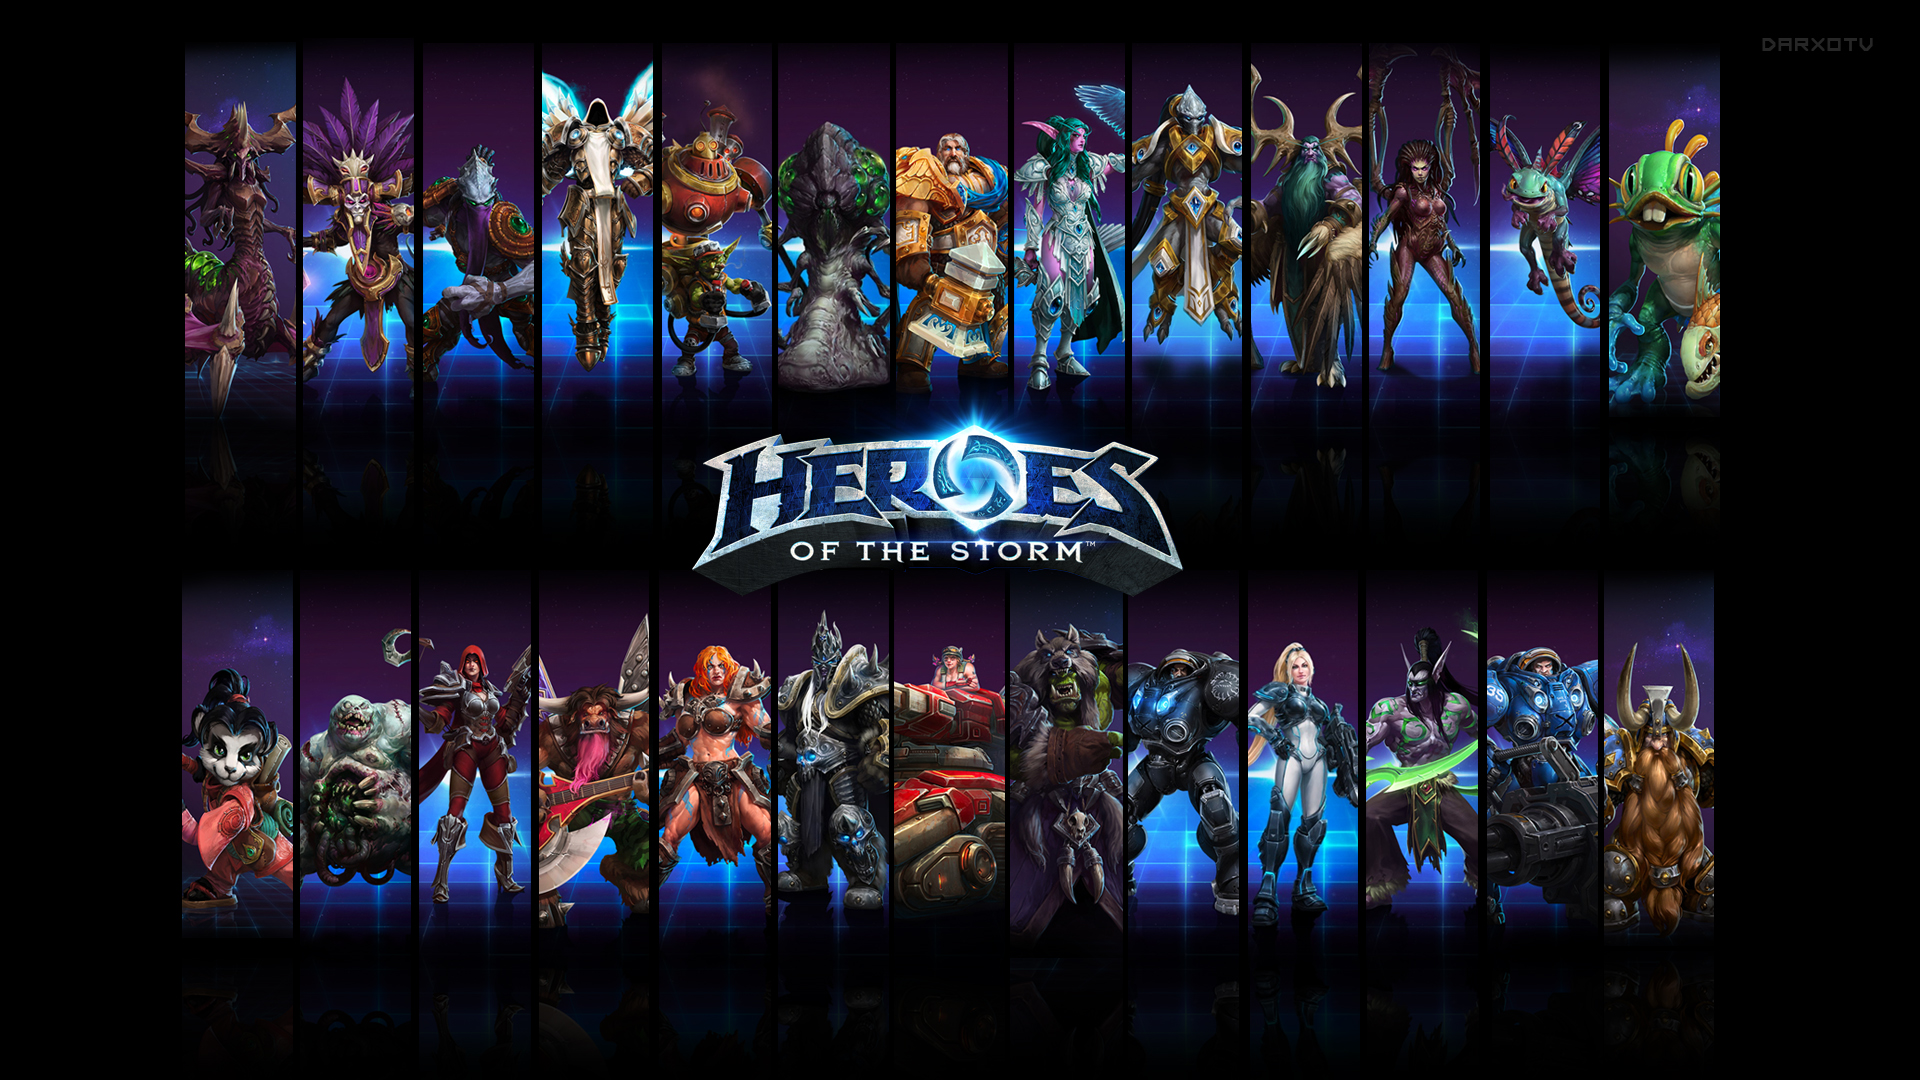 Heroes Of The Storm Wallpaper By Darxotv On